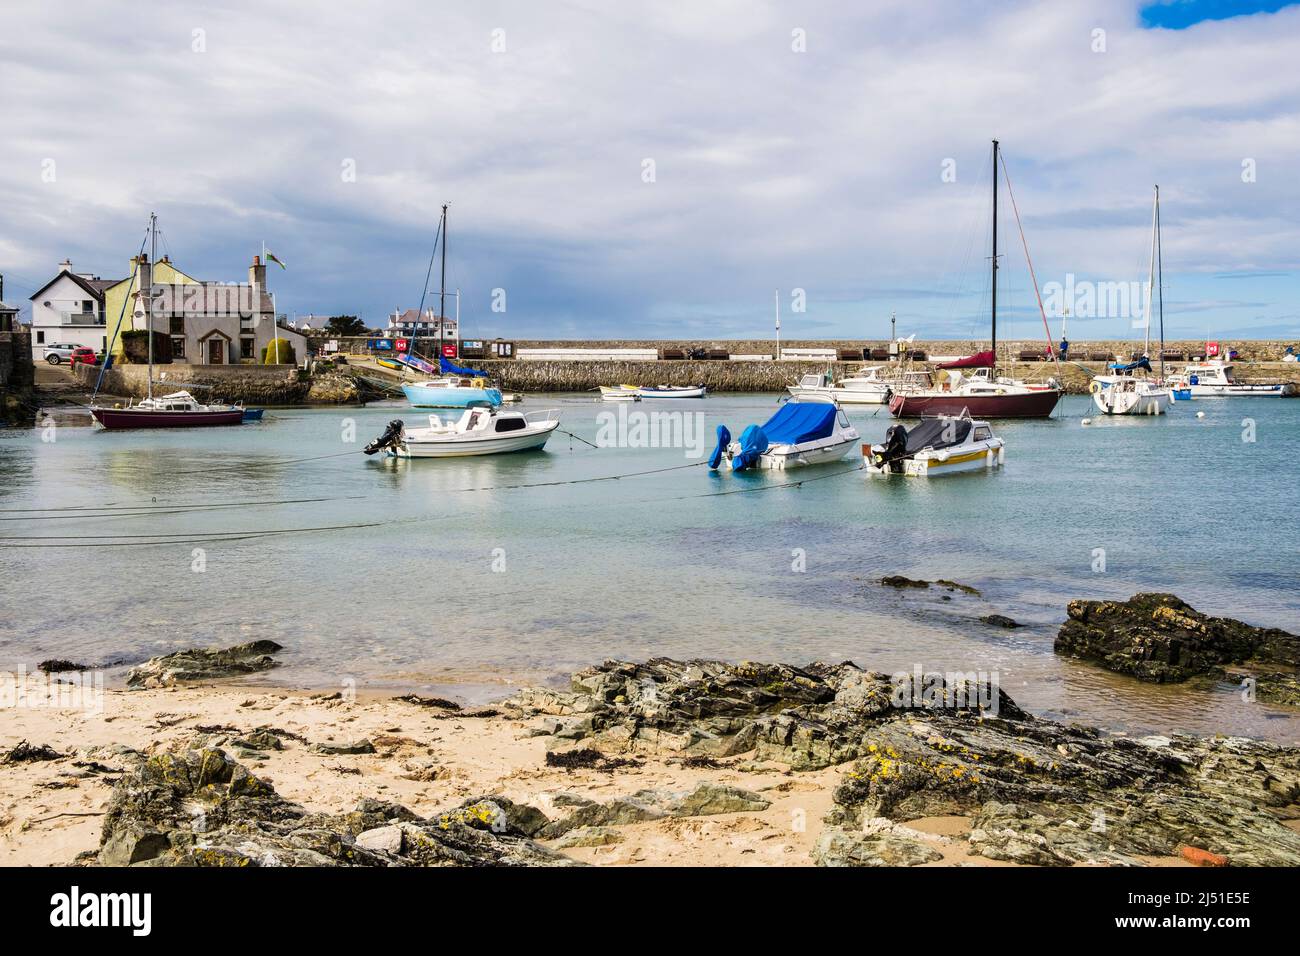 Boats moored in Cemaes harbour at high tide on the north coast. Cemaes Bay, Cemaes, Isle of Anglesey, north Wales, UK, Britain Stock Photo